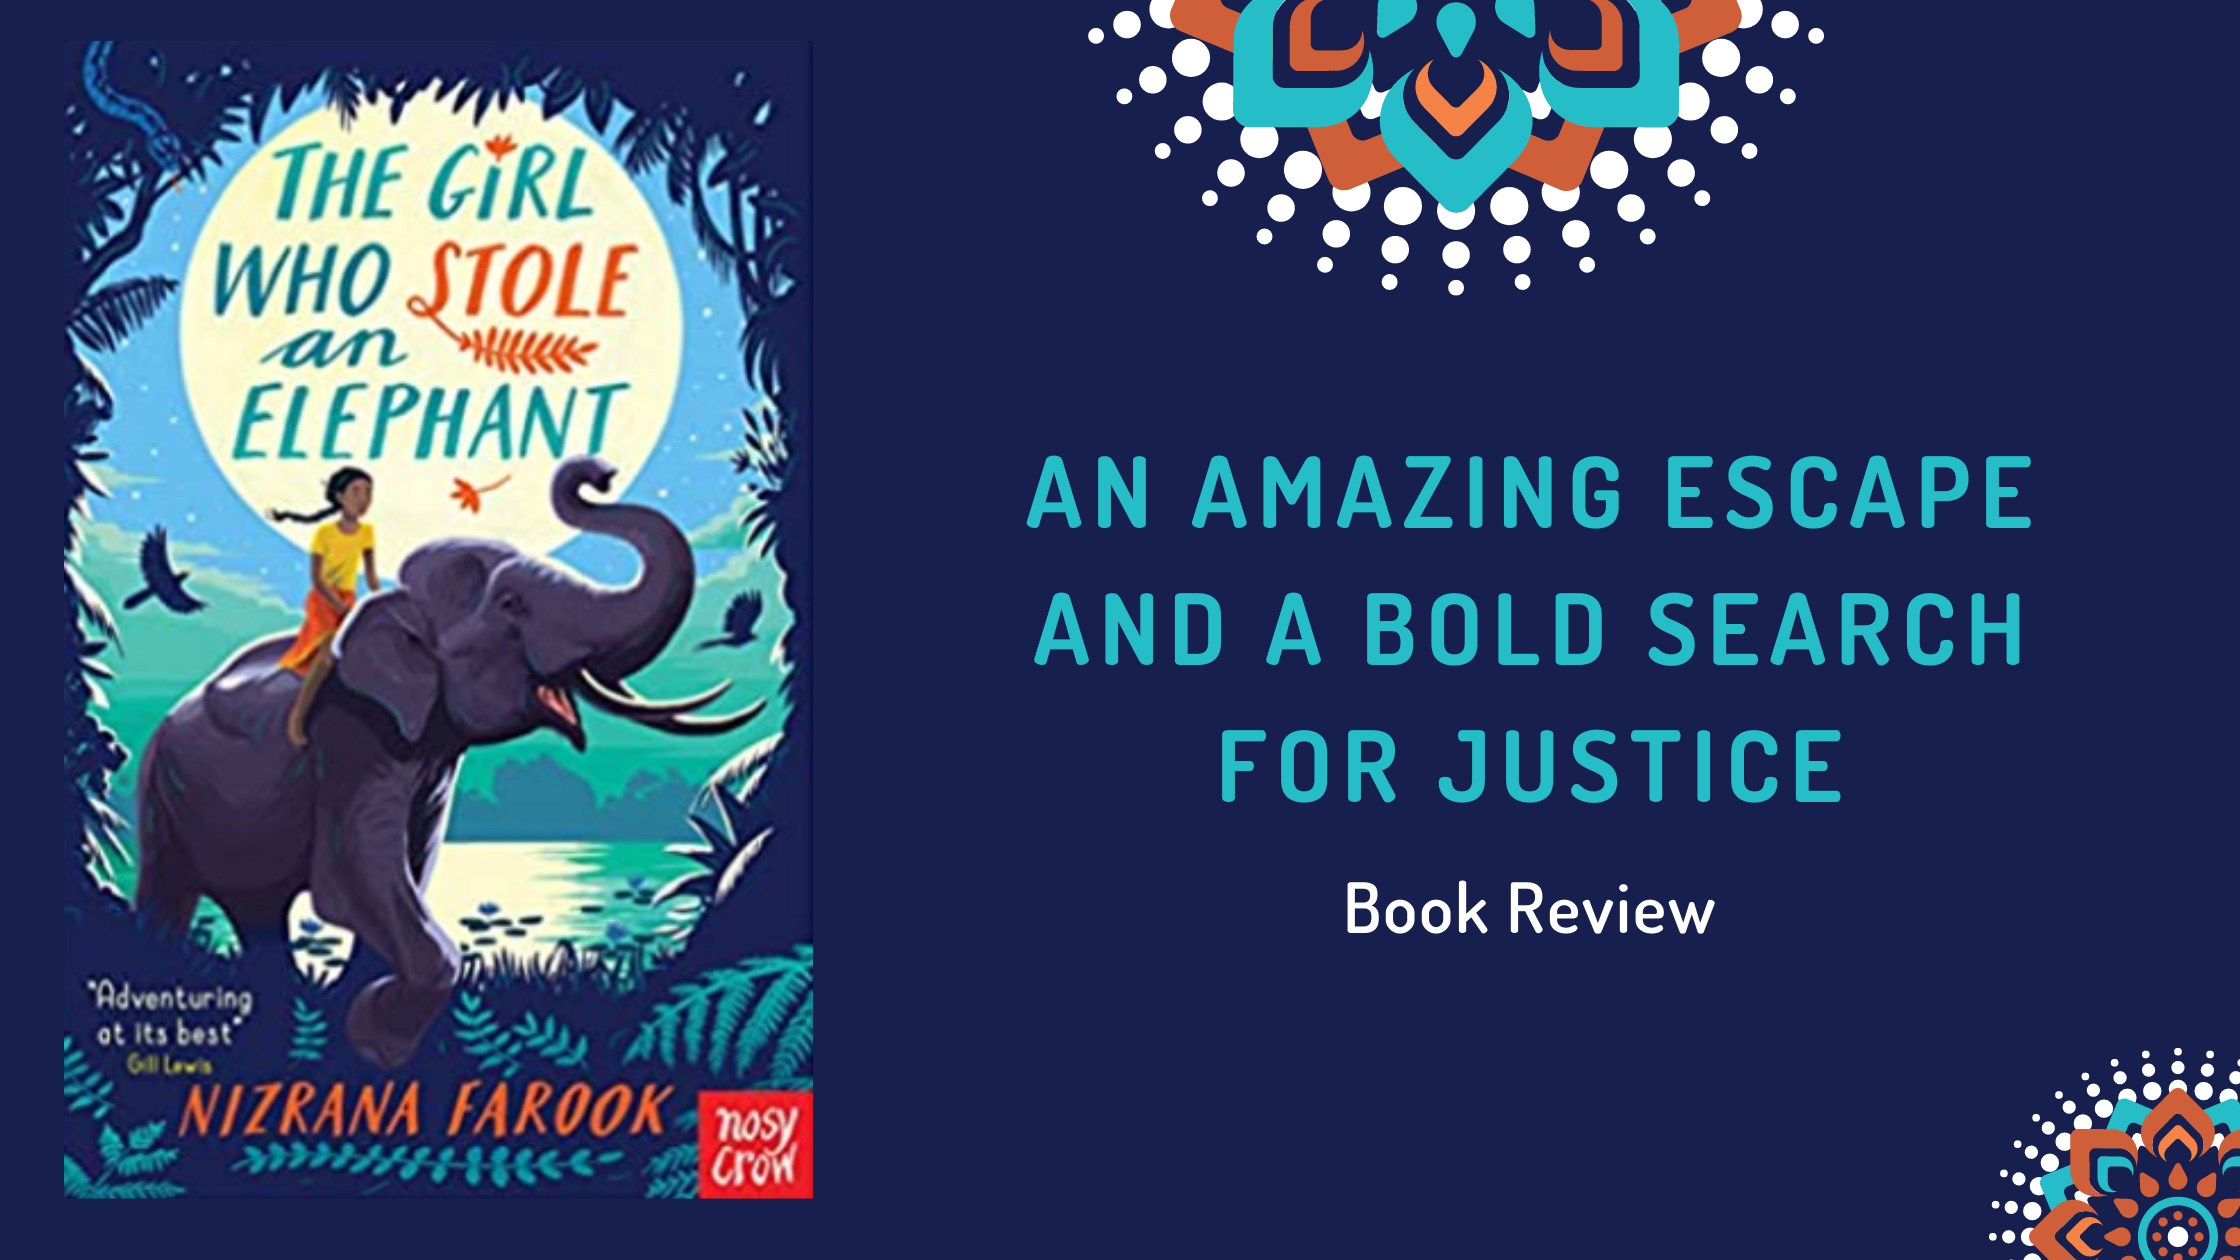 The Girl Who Stole An Elephant - Book Review